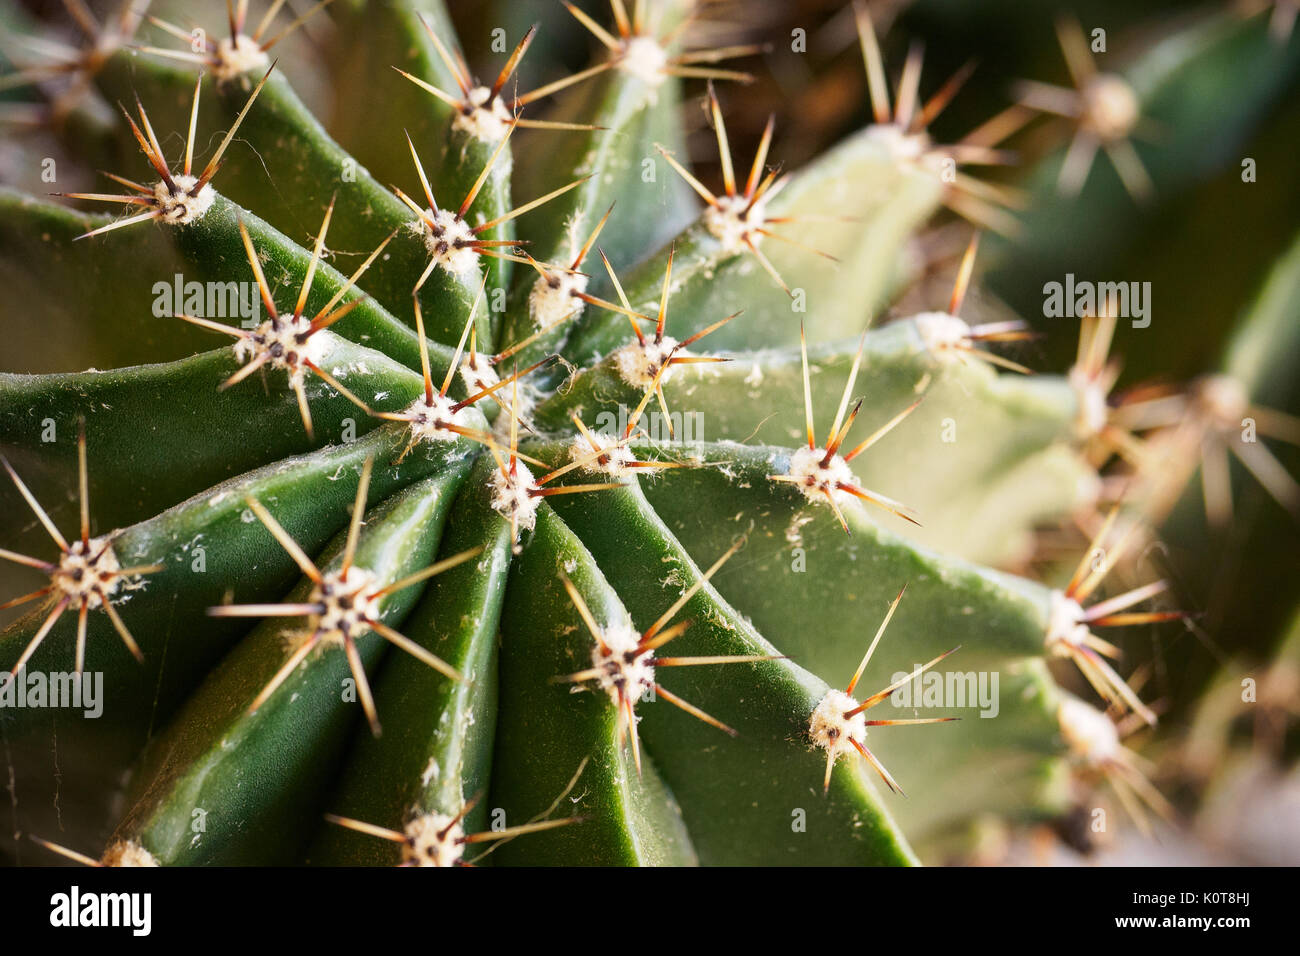 Close up of a succulent plant with spines. Landscape format. Stock Photo